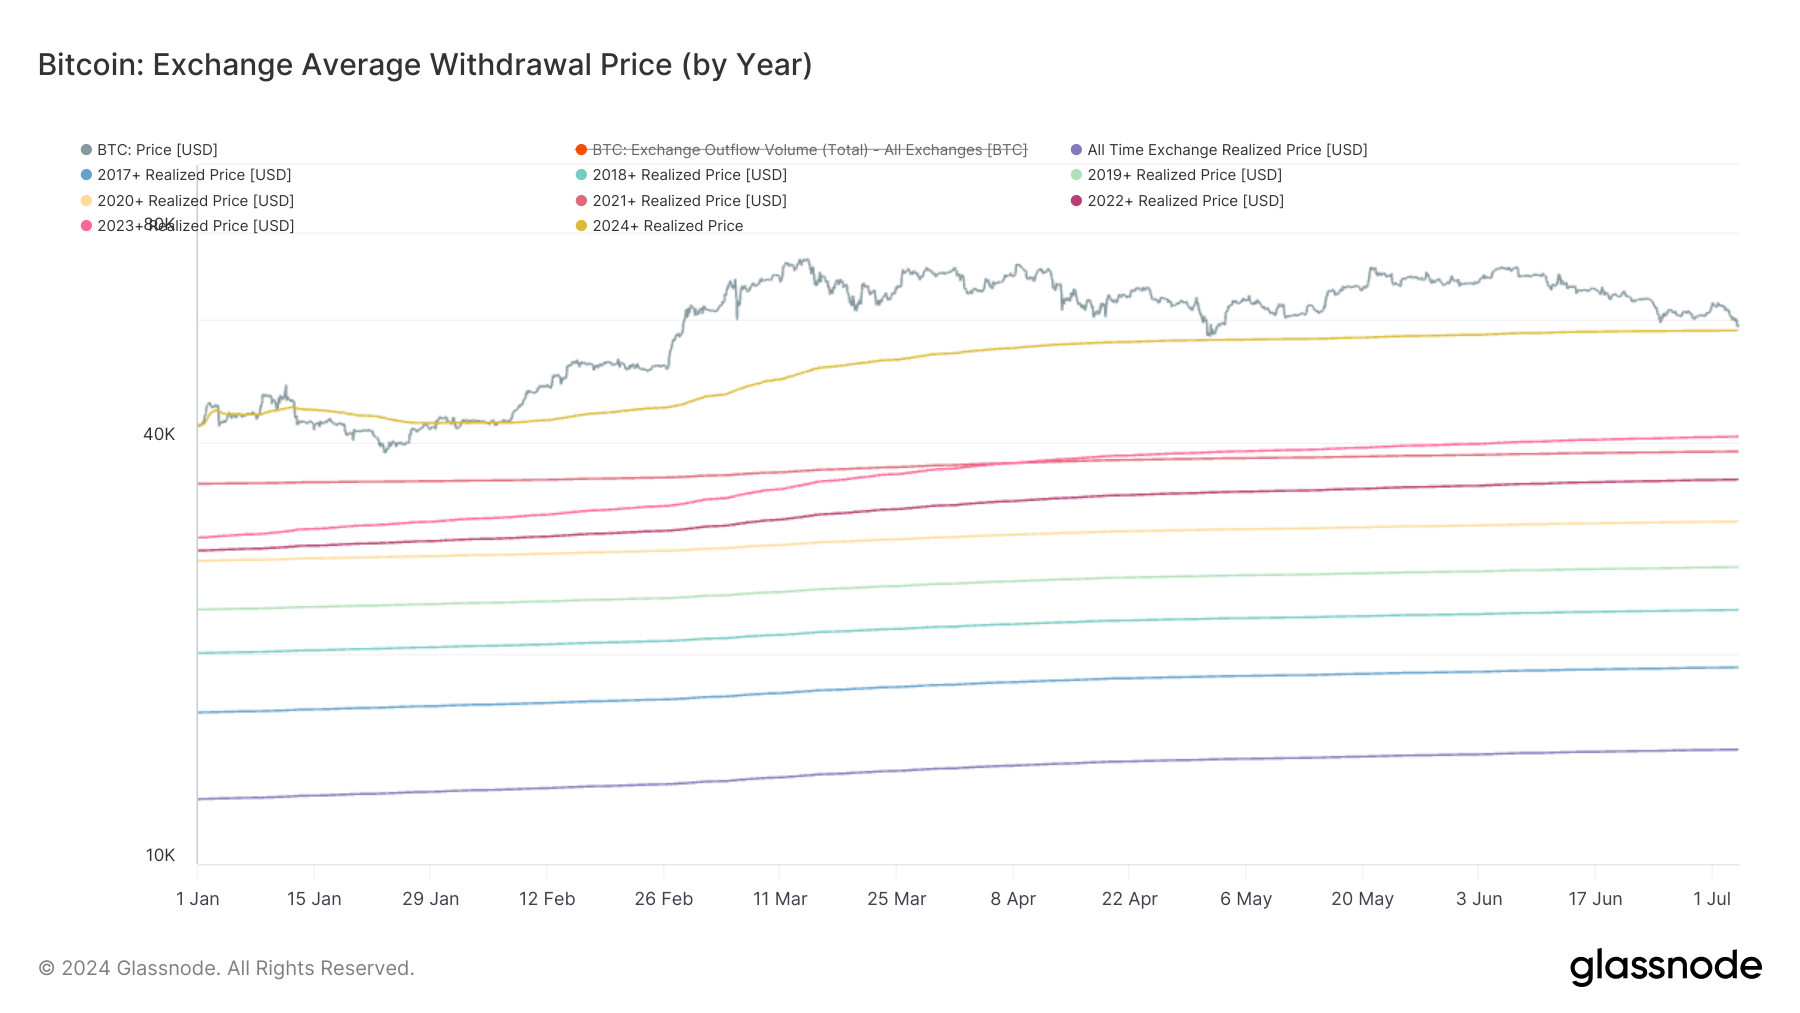 Bitcoin: Exchange Average Withdrawal Price (by Year)